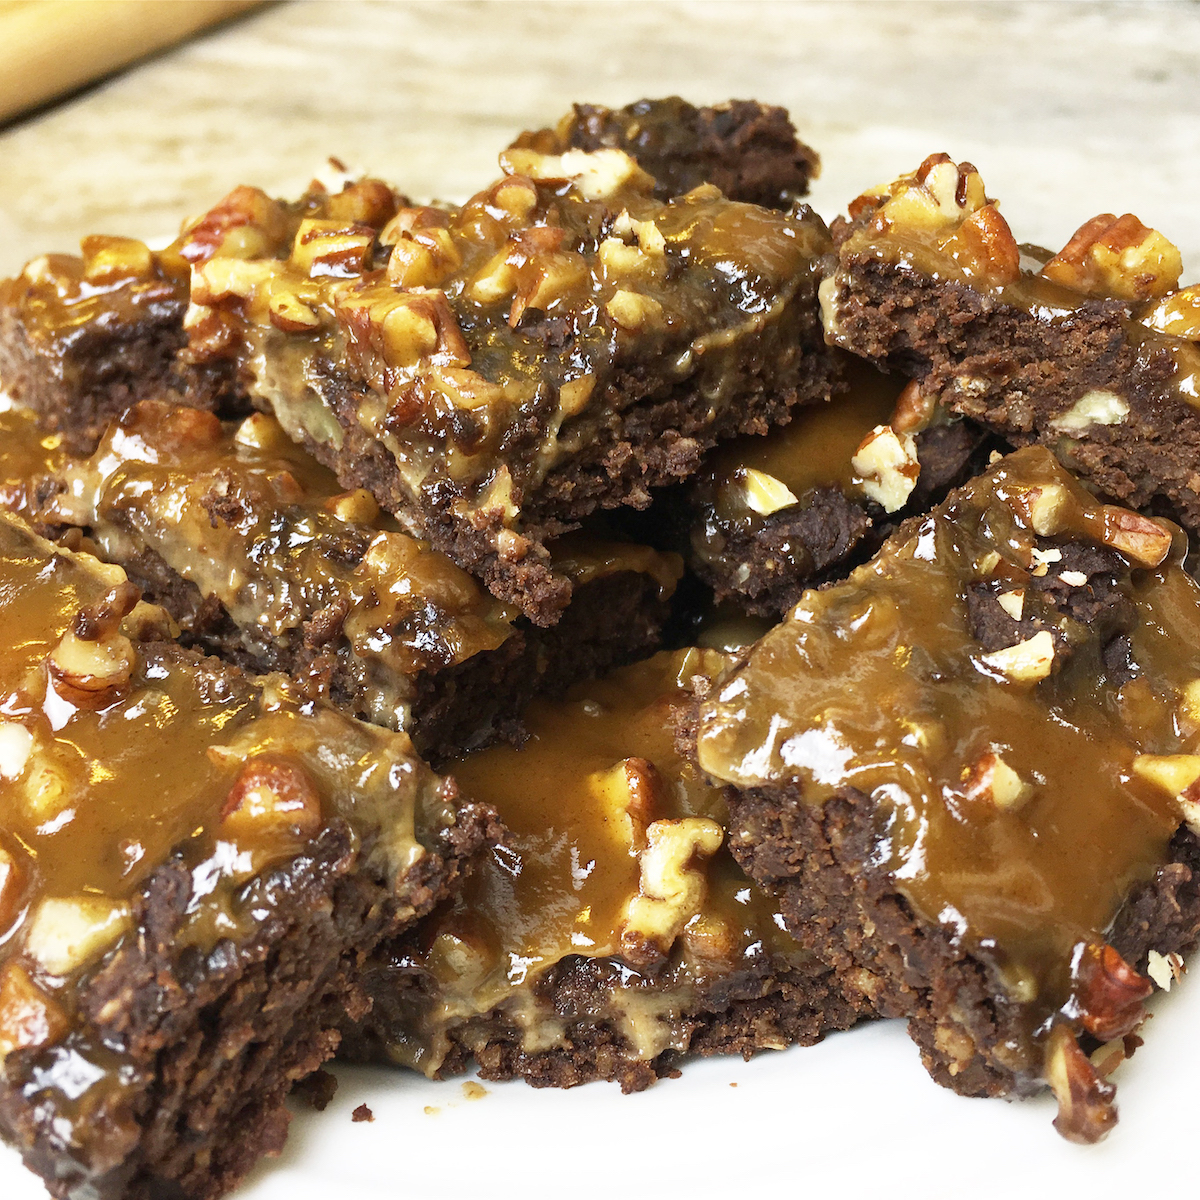 Vegan and gluten-free black bean brownies are ready to go! Delicious and nutritious! 